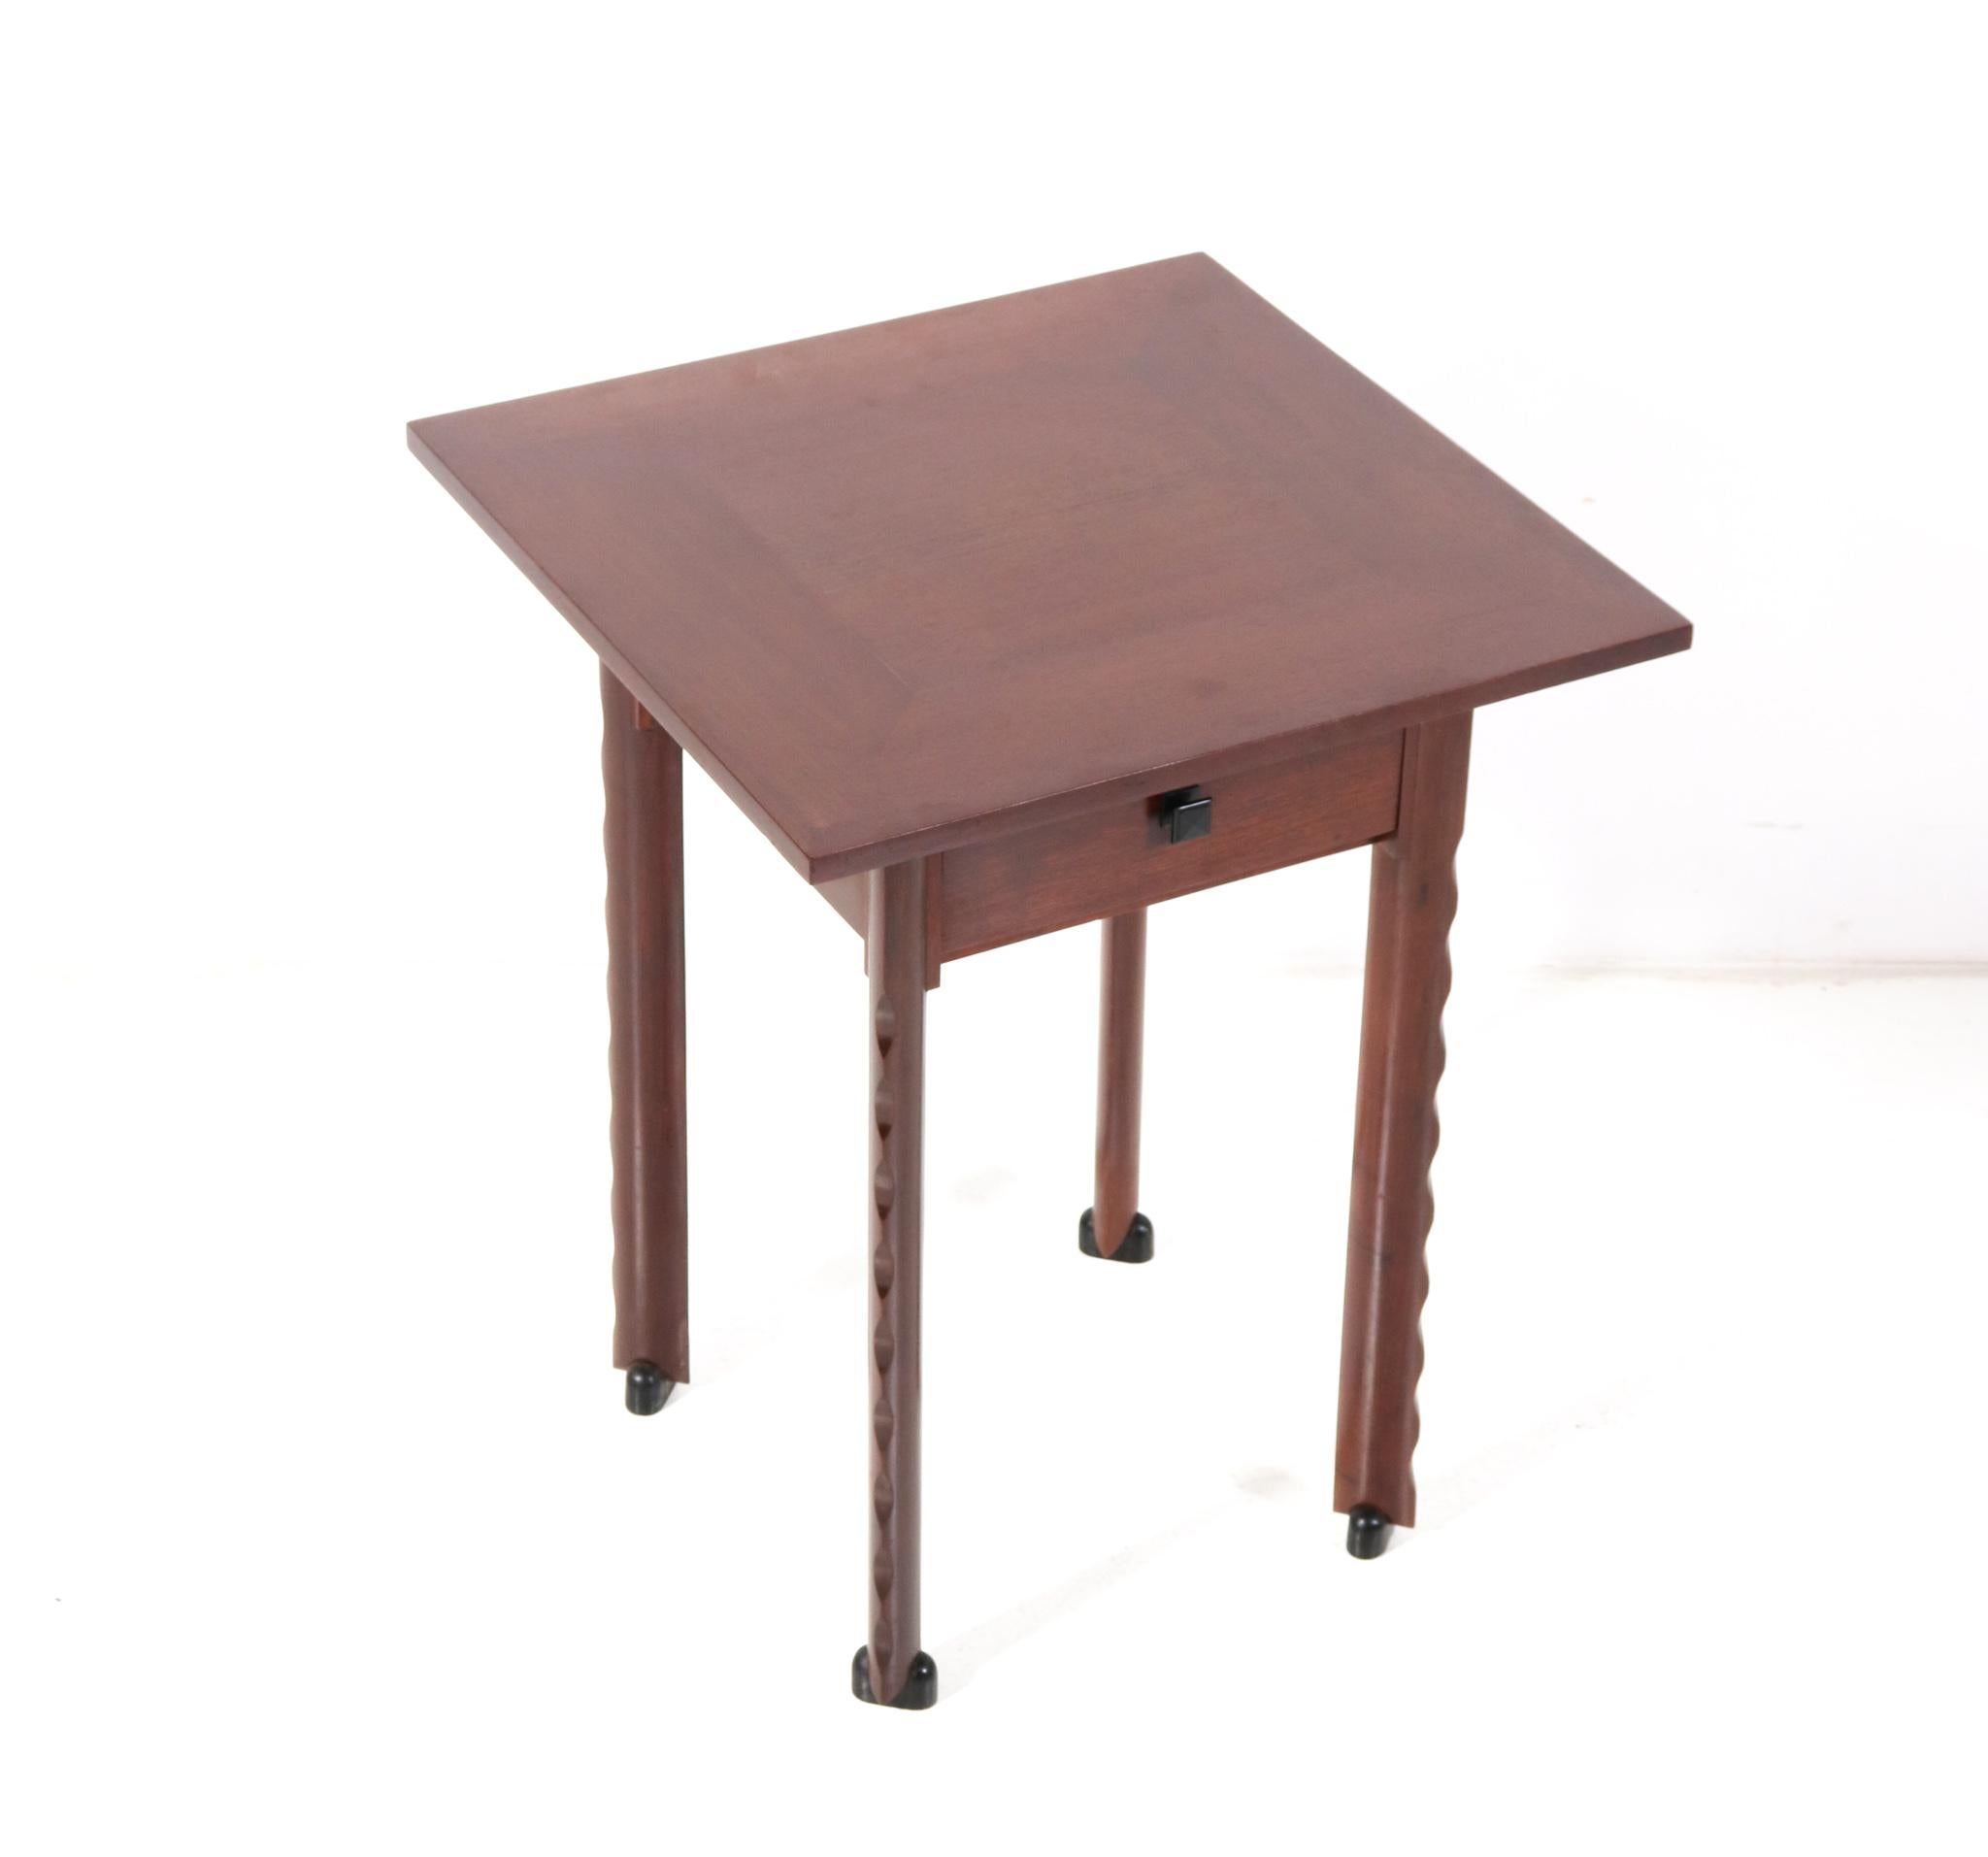 Magnificent and ultra rare game table or card table.
Design by C.H. Eckhart Rotterdam.
Striking Dutch design from the 1920s.
Solid walnut base with original walnut veneered top.
Four drop front flaps with four original stylish solid ebony